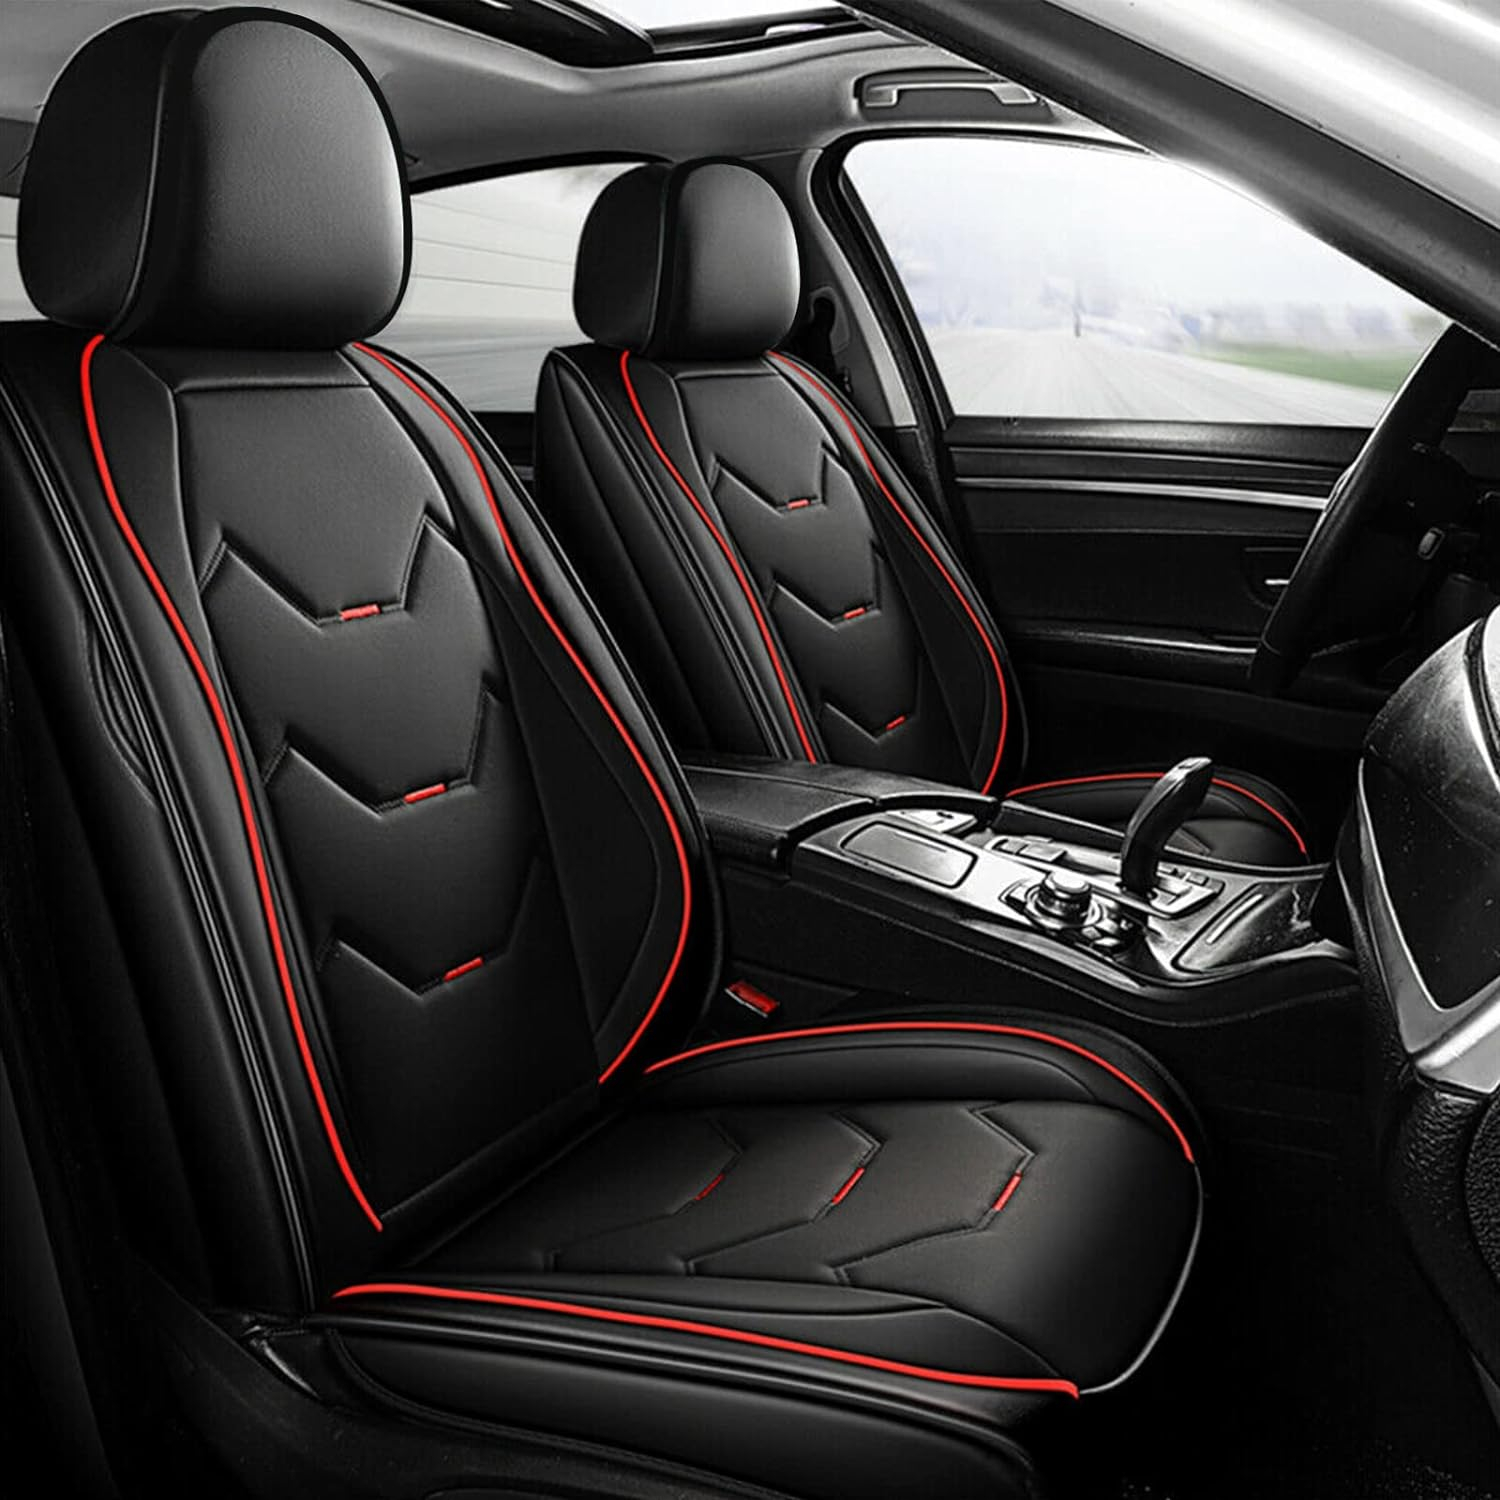 Premium PU Leather Car Seat Covers – Complete Black Set for 5-Seat Cars, Trucks, and Vans